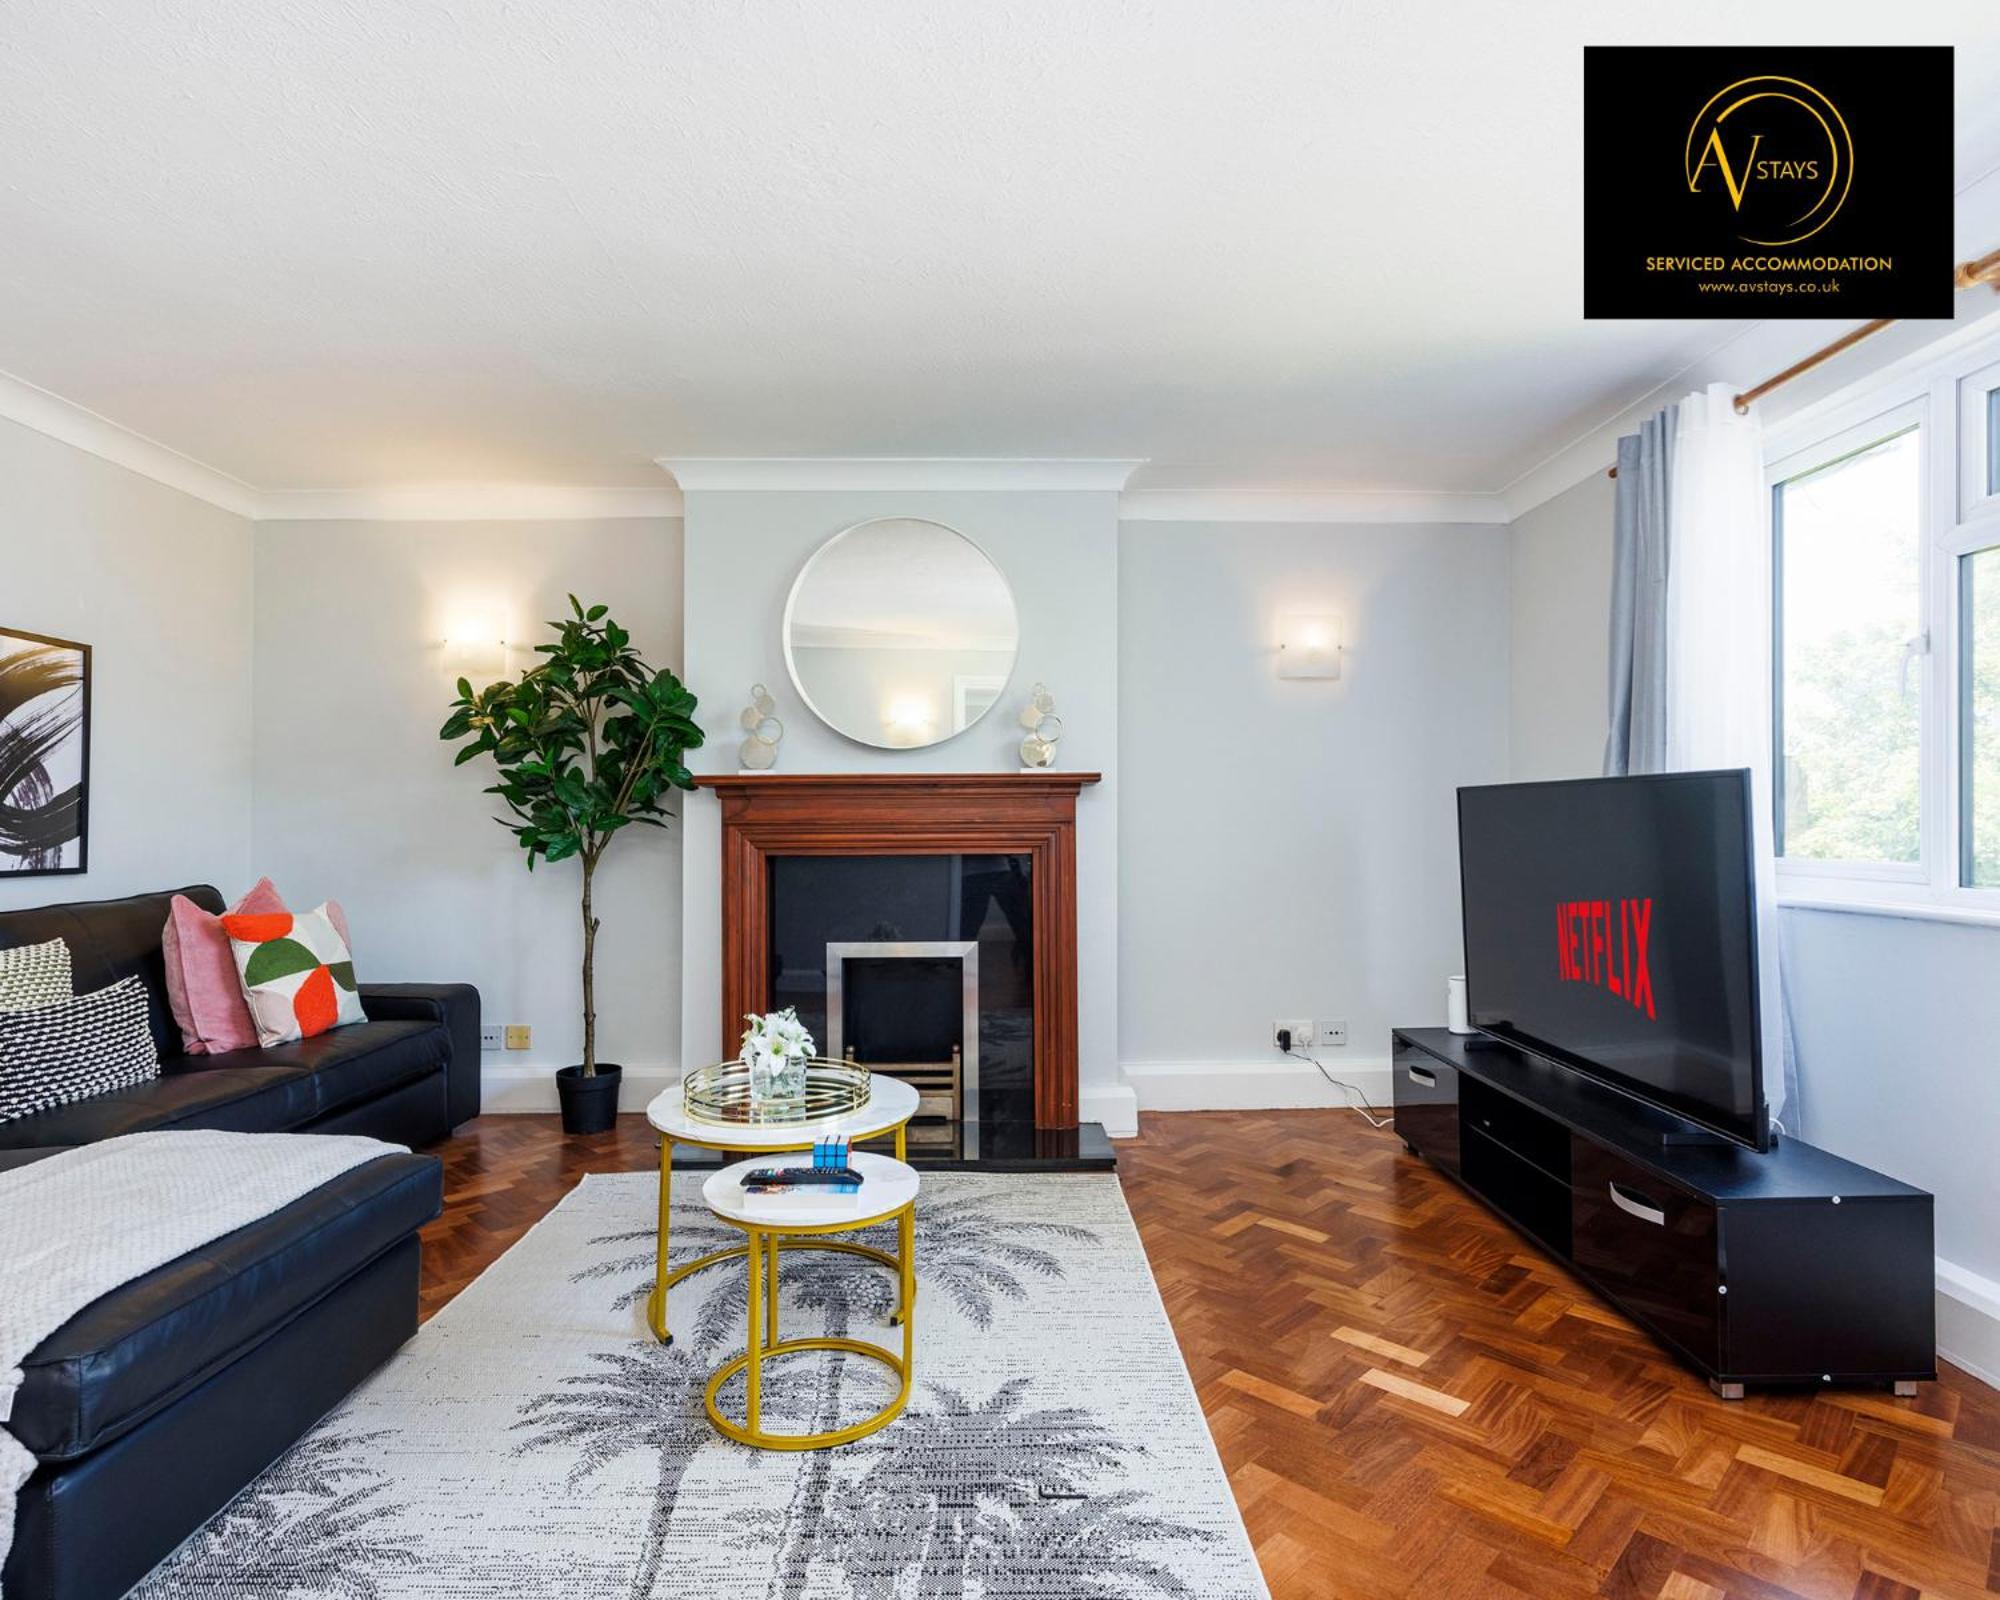 Large 2 Bed Apartment By Av Stays East Croydon South Norwood 外观 照片